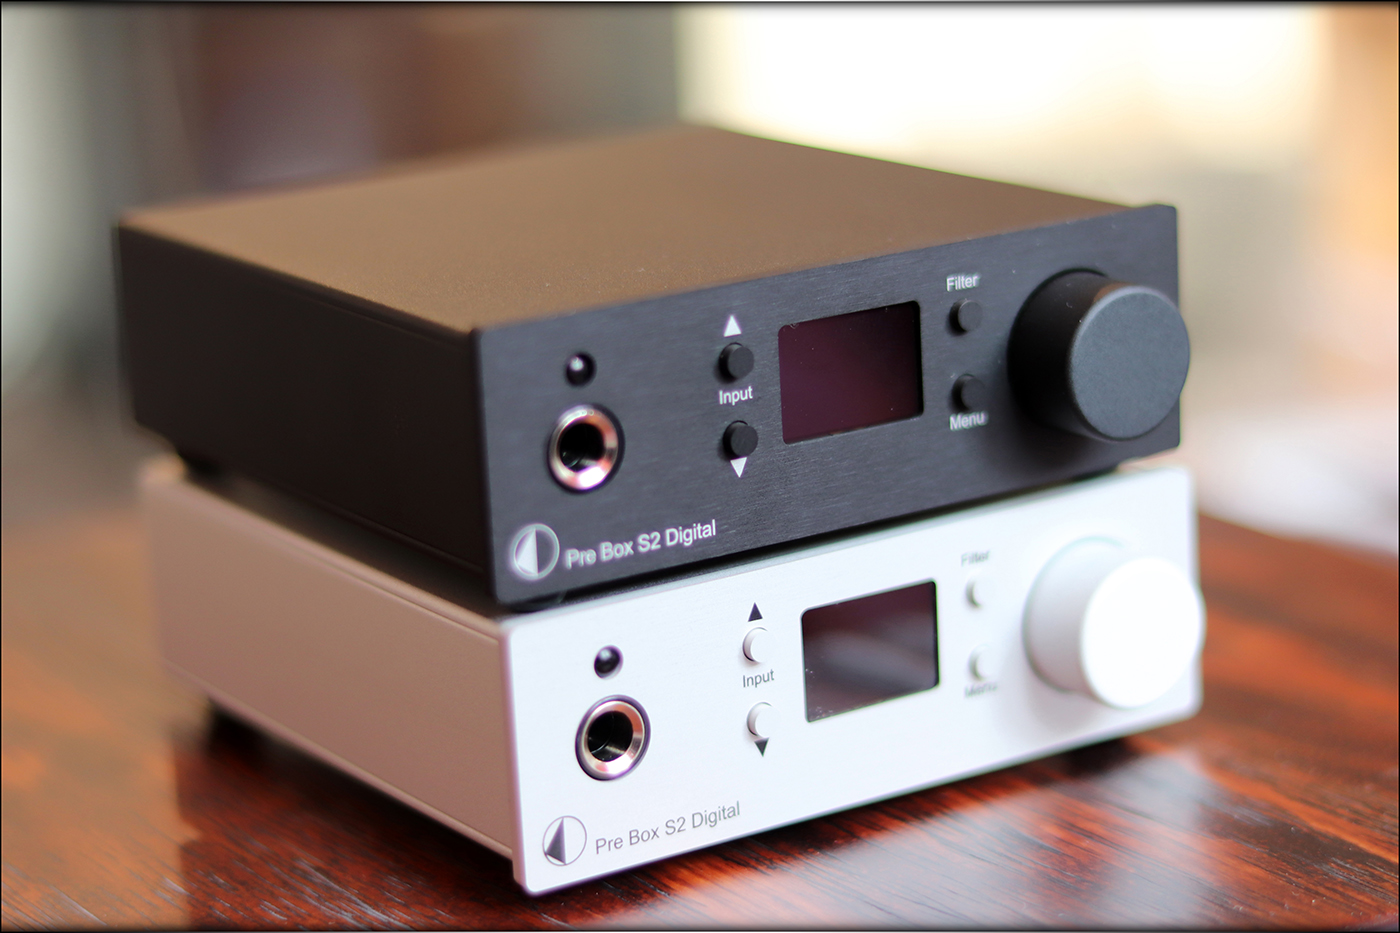 Natural Mqa Dac Performer Pro Ject Pre Box S2 Digital Dac And Preamp Review Audiophile Heaven